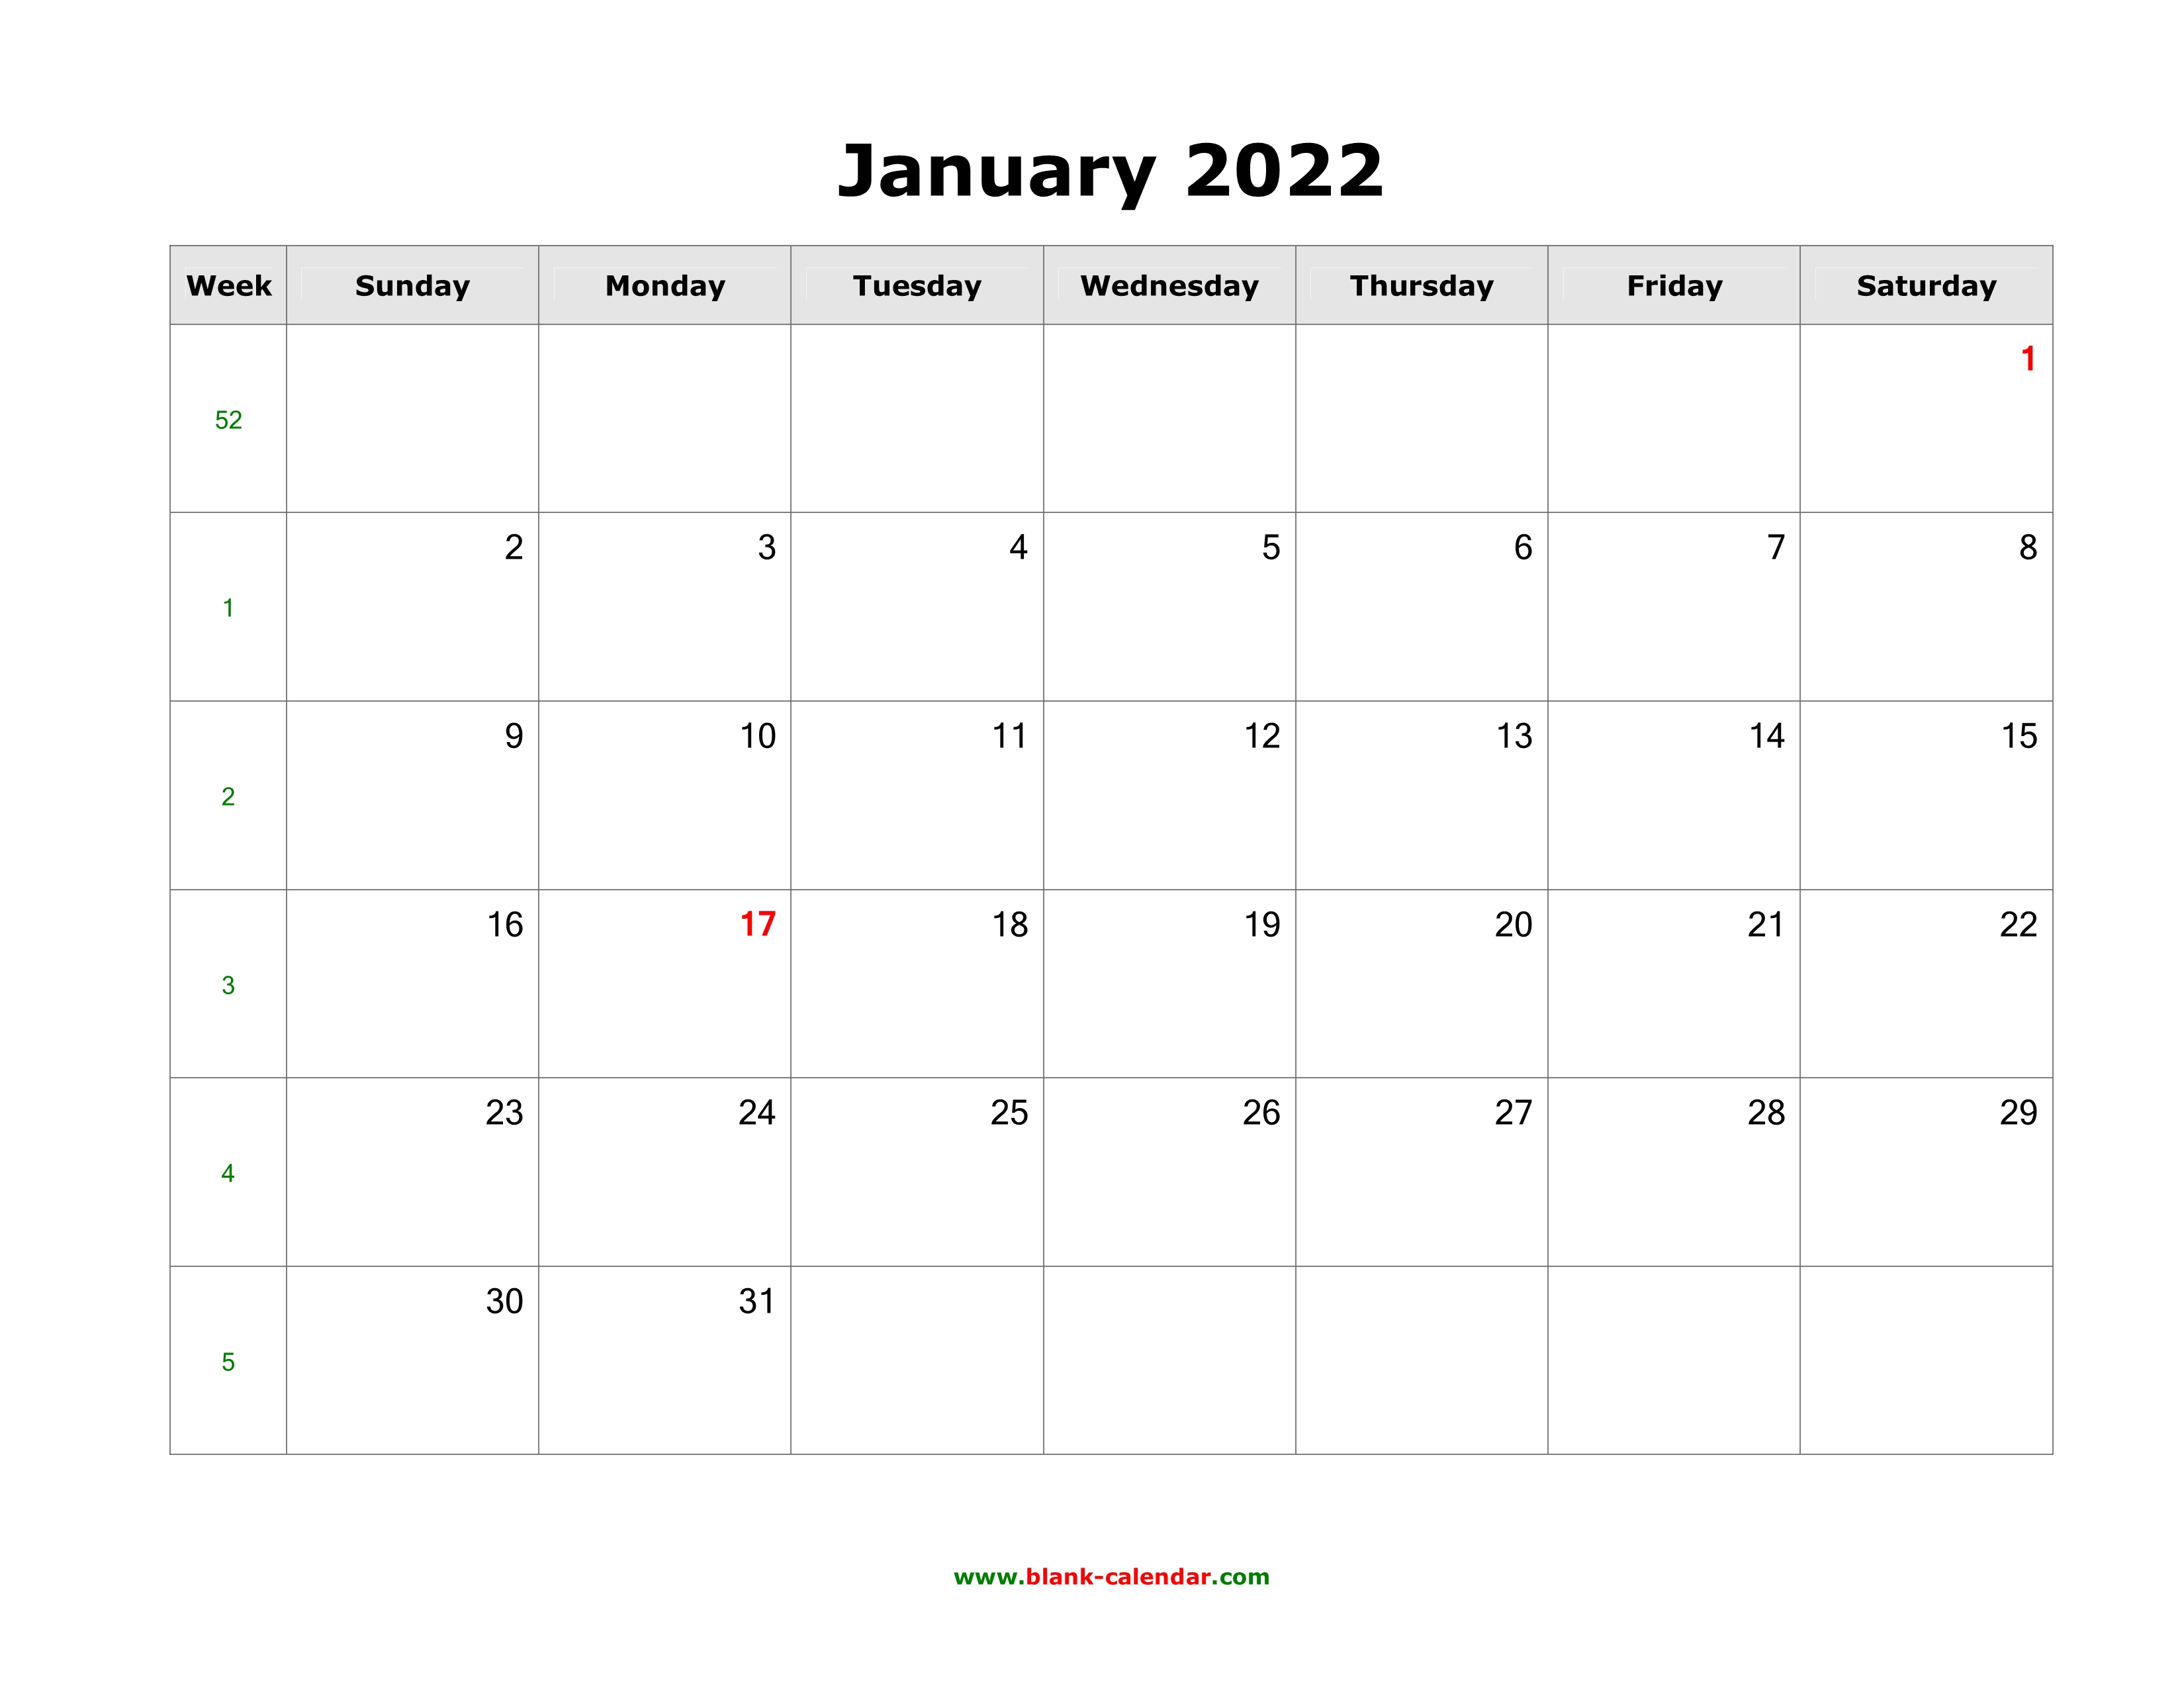 Free Blank Monthly Calendar 2022 Download Blank Calendar 2022 (12 Pages, One Month Per Page, Horizontal)